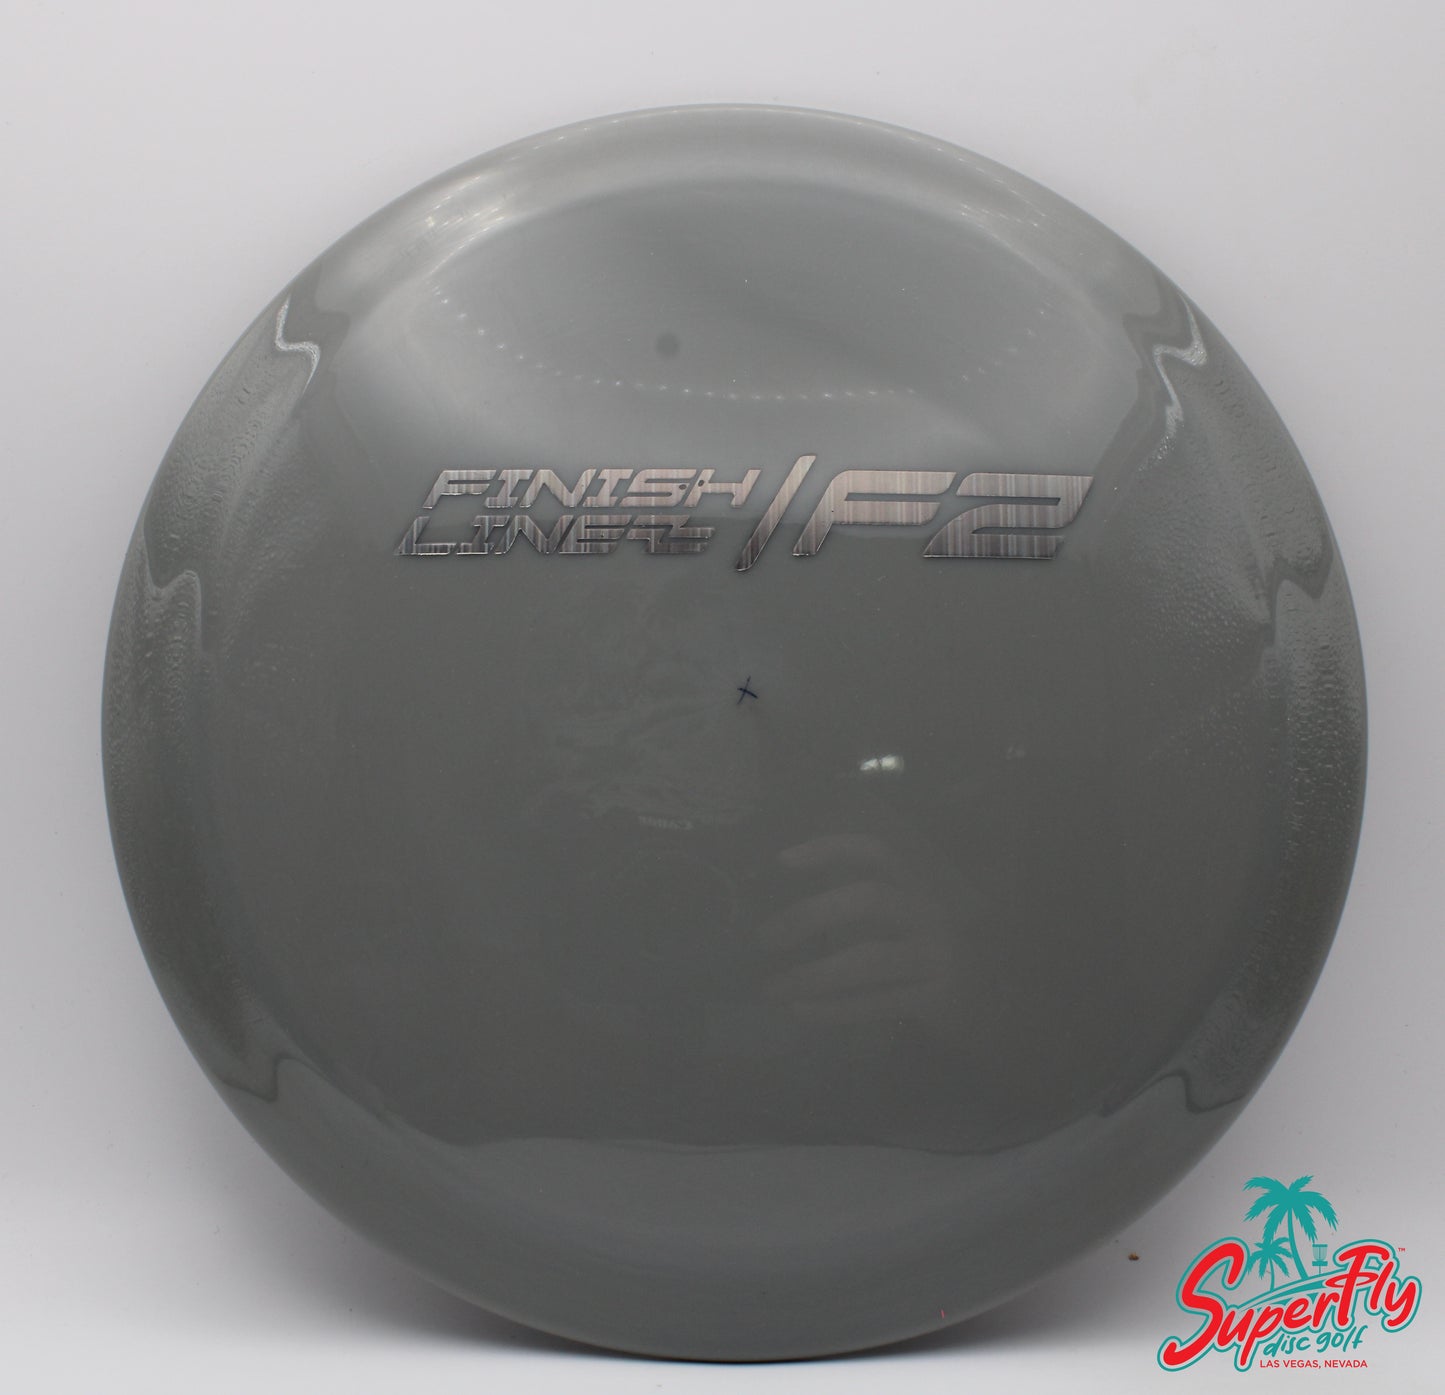 Finish Line Discs Forged X-Out Era